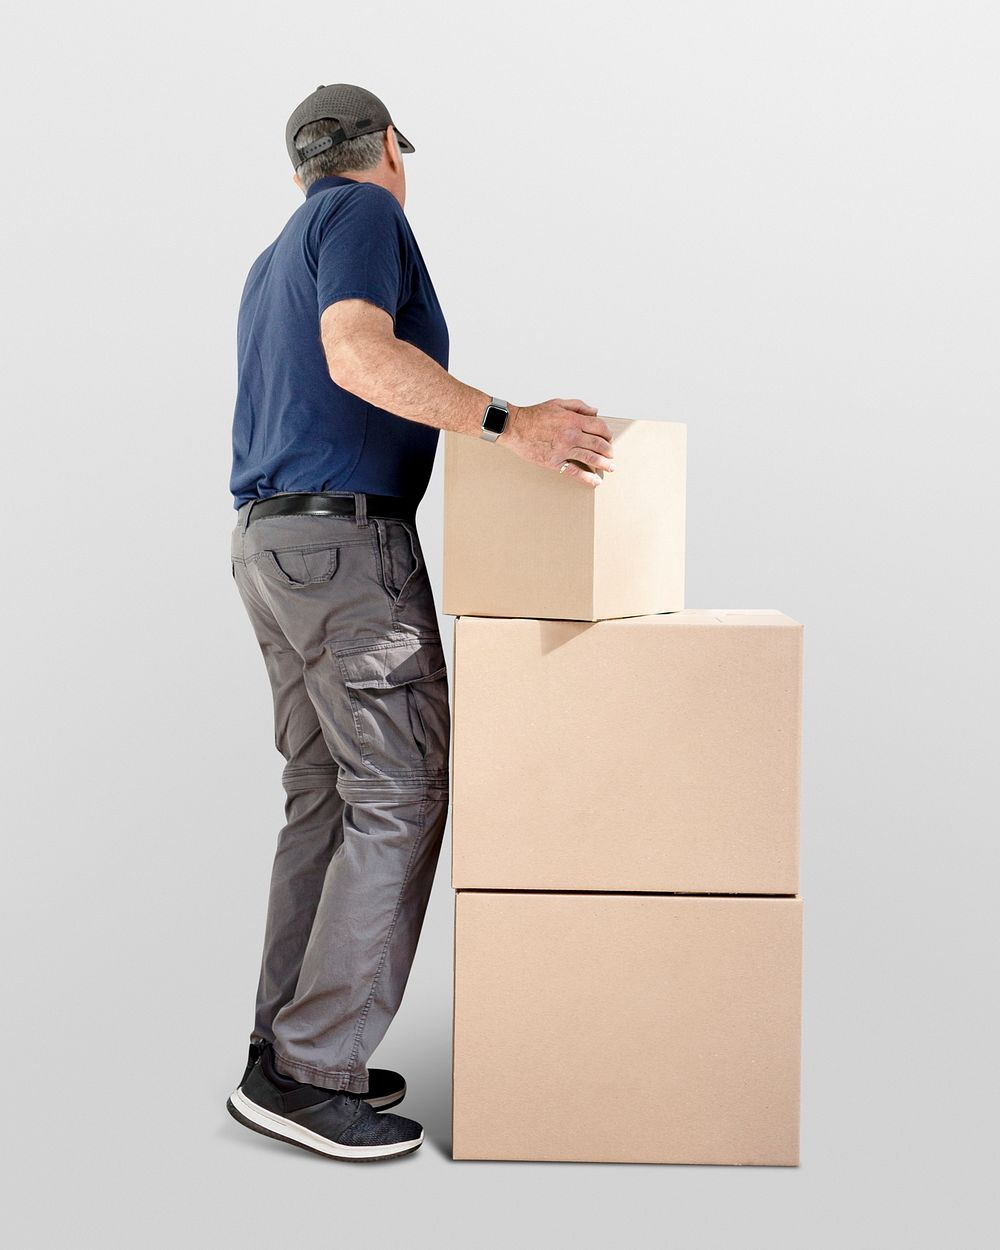 Delivery service man, stacked parcel boxes image with job concept